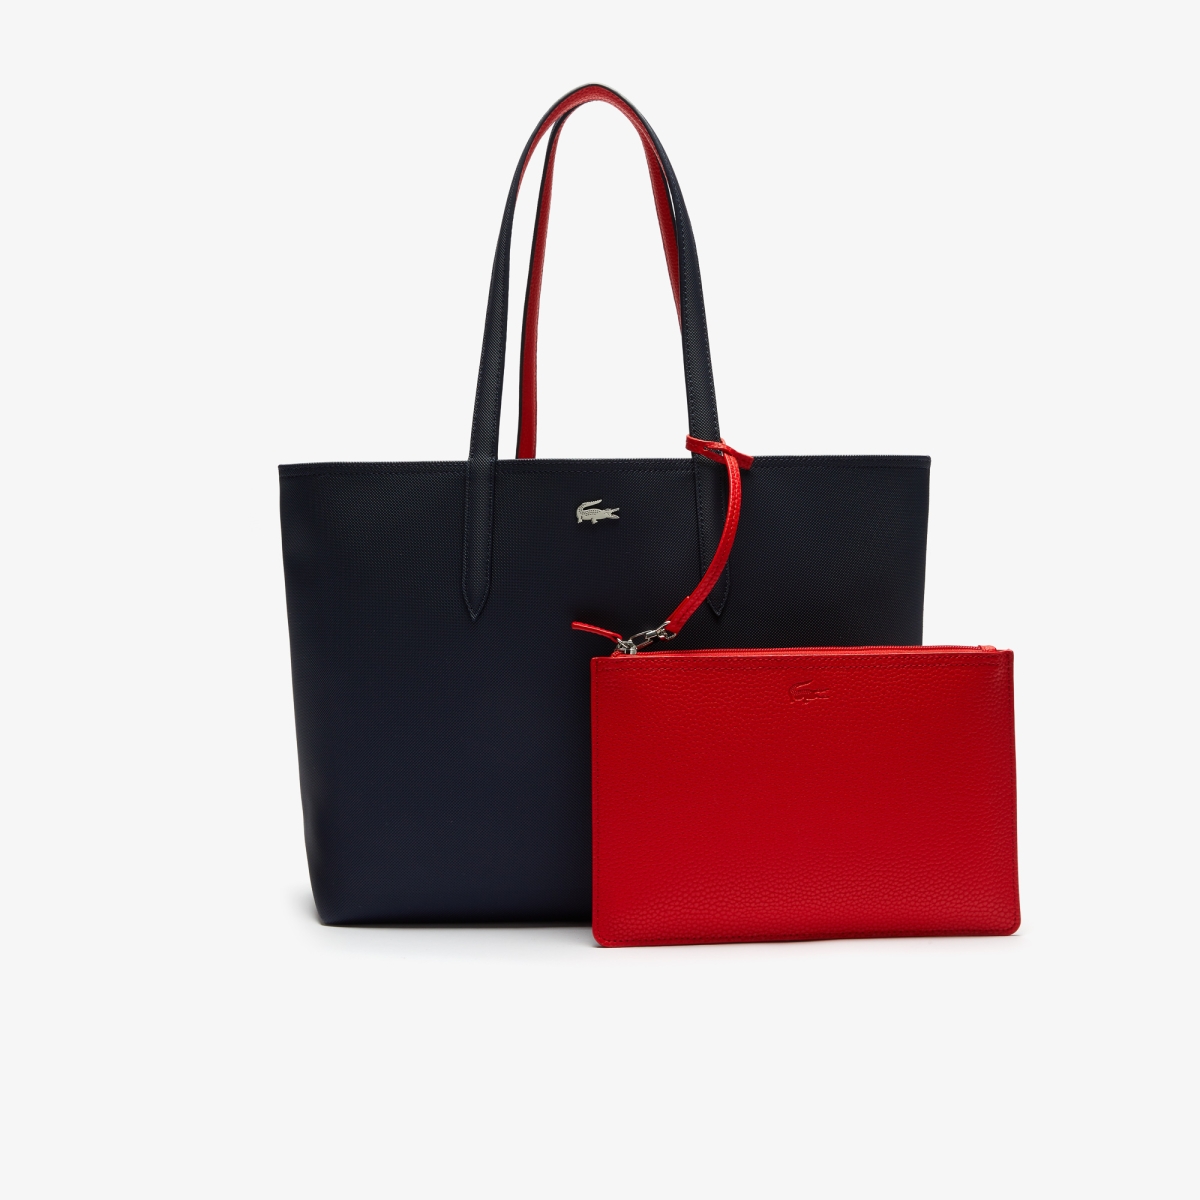 Lacoste Bags For Women - Get Best Price from Manufacturers & Suppliers in  India